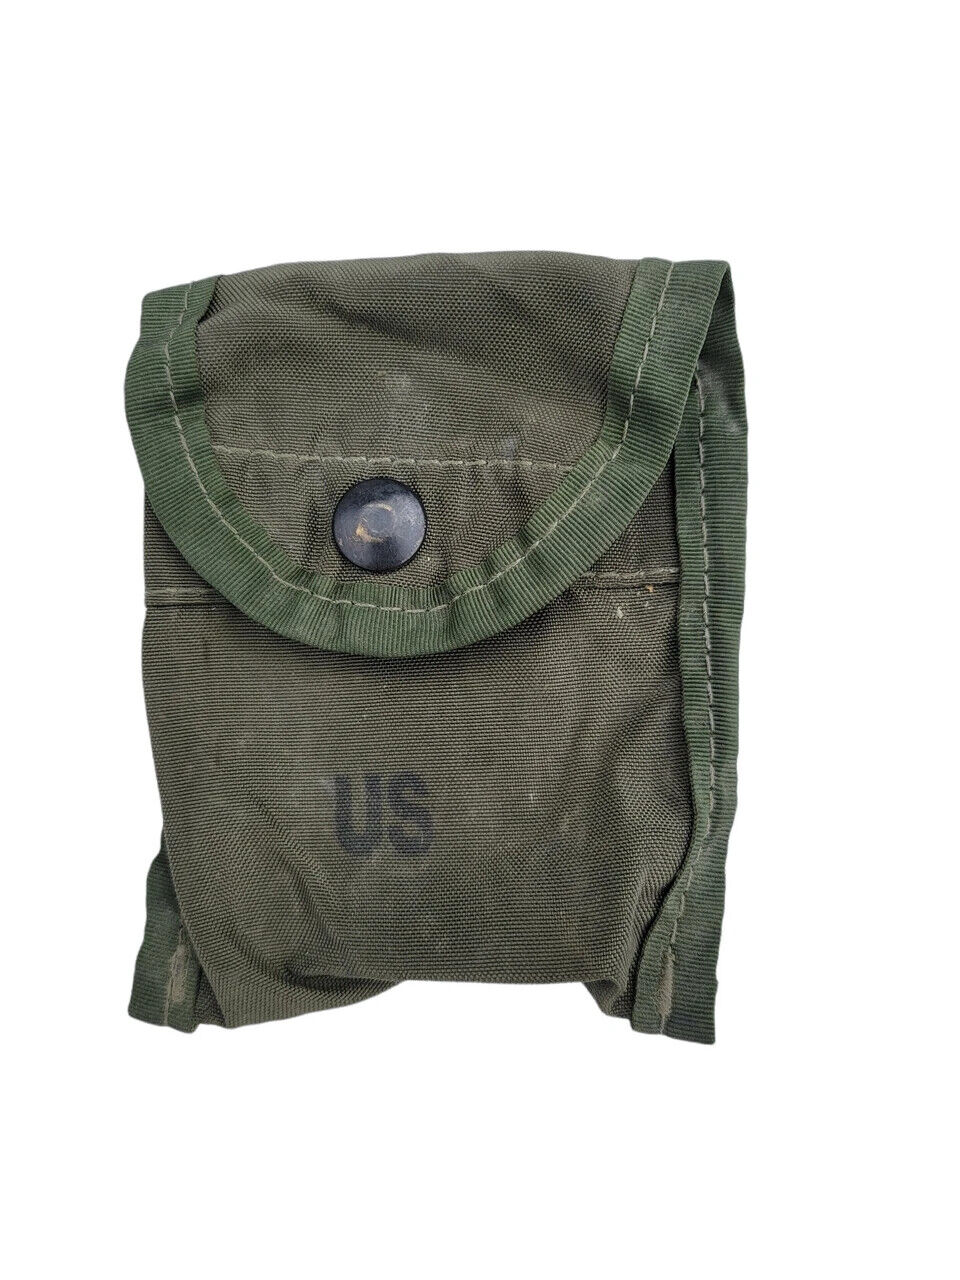 US Military General Purpose Pouch, Alice Clip, First Aid, Compass